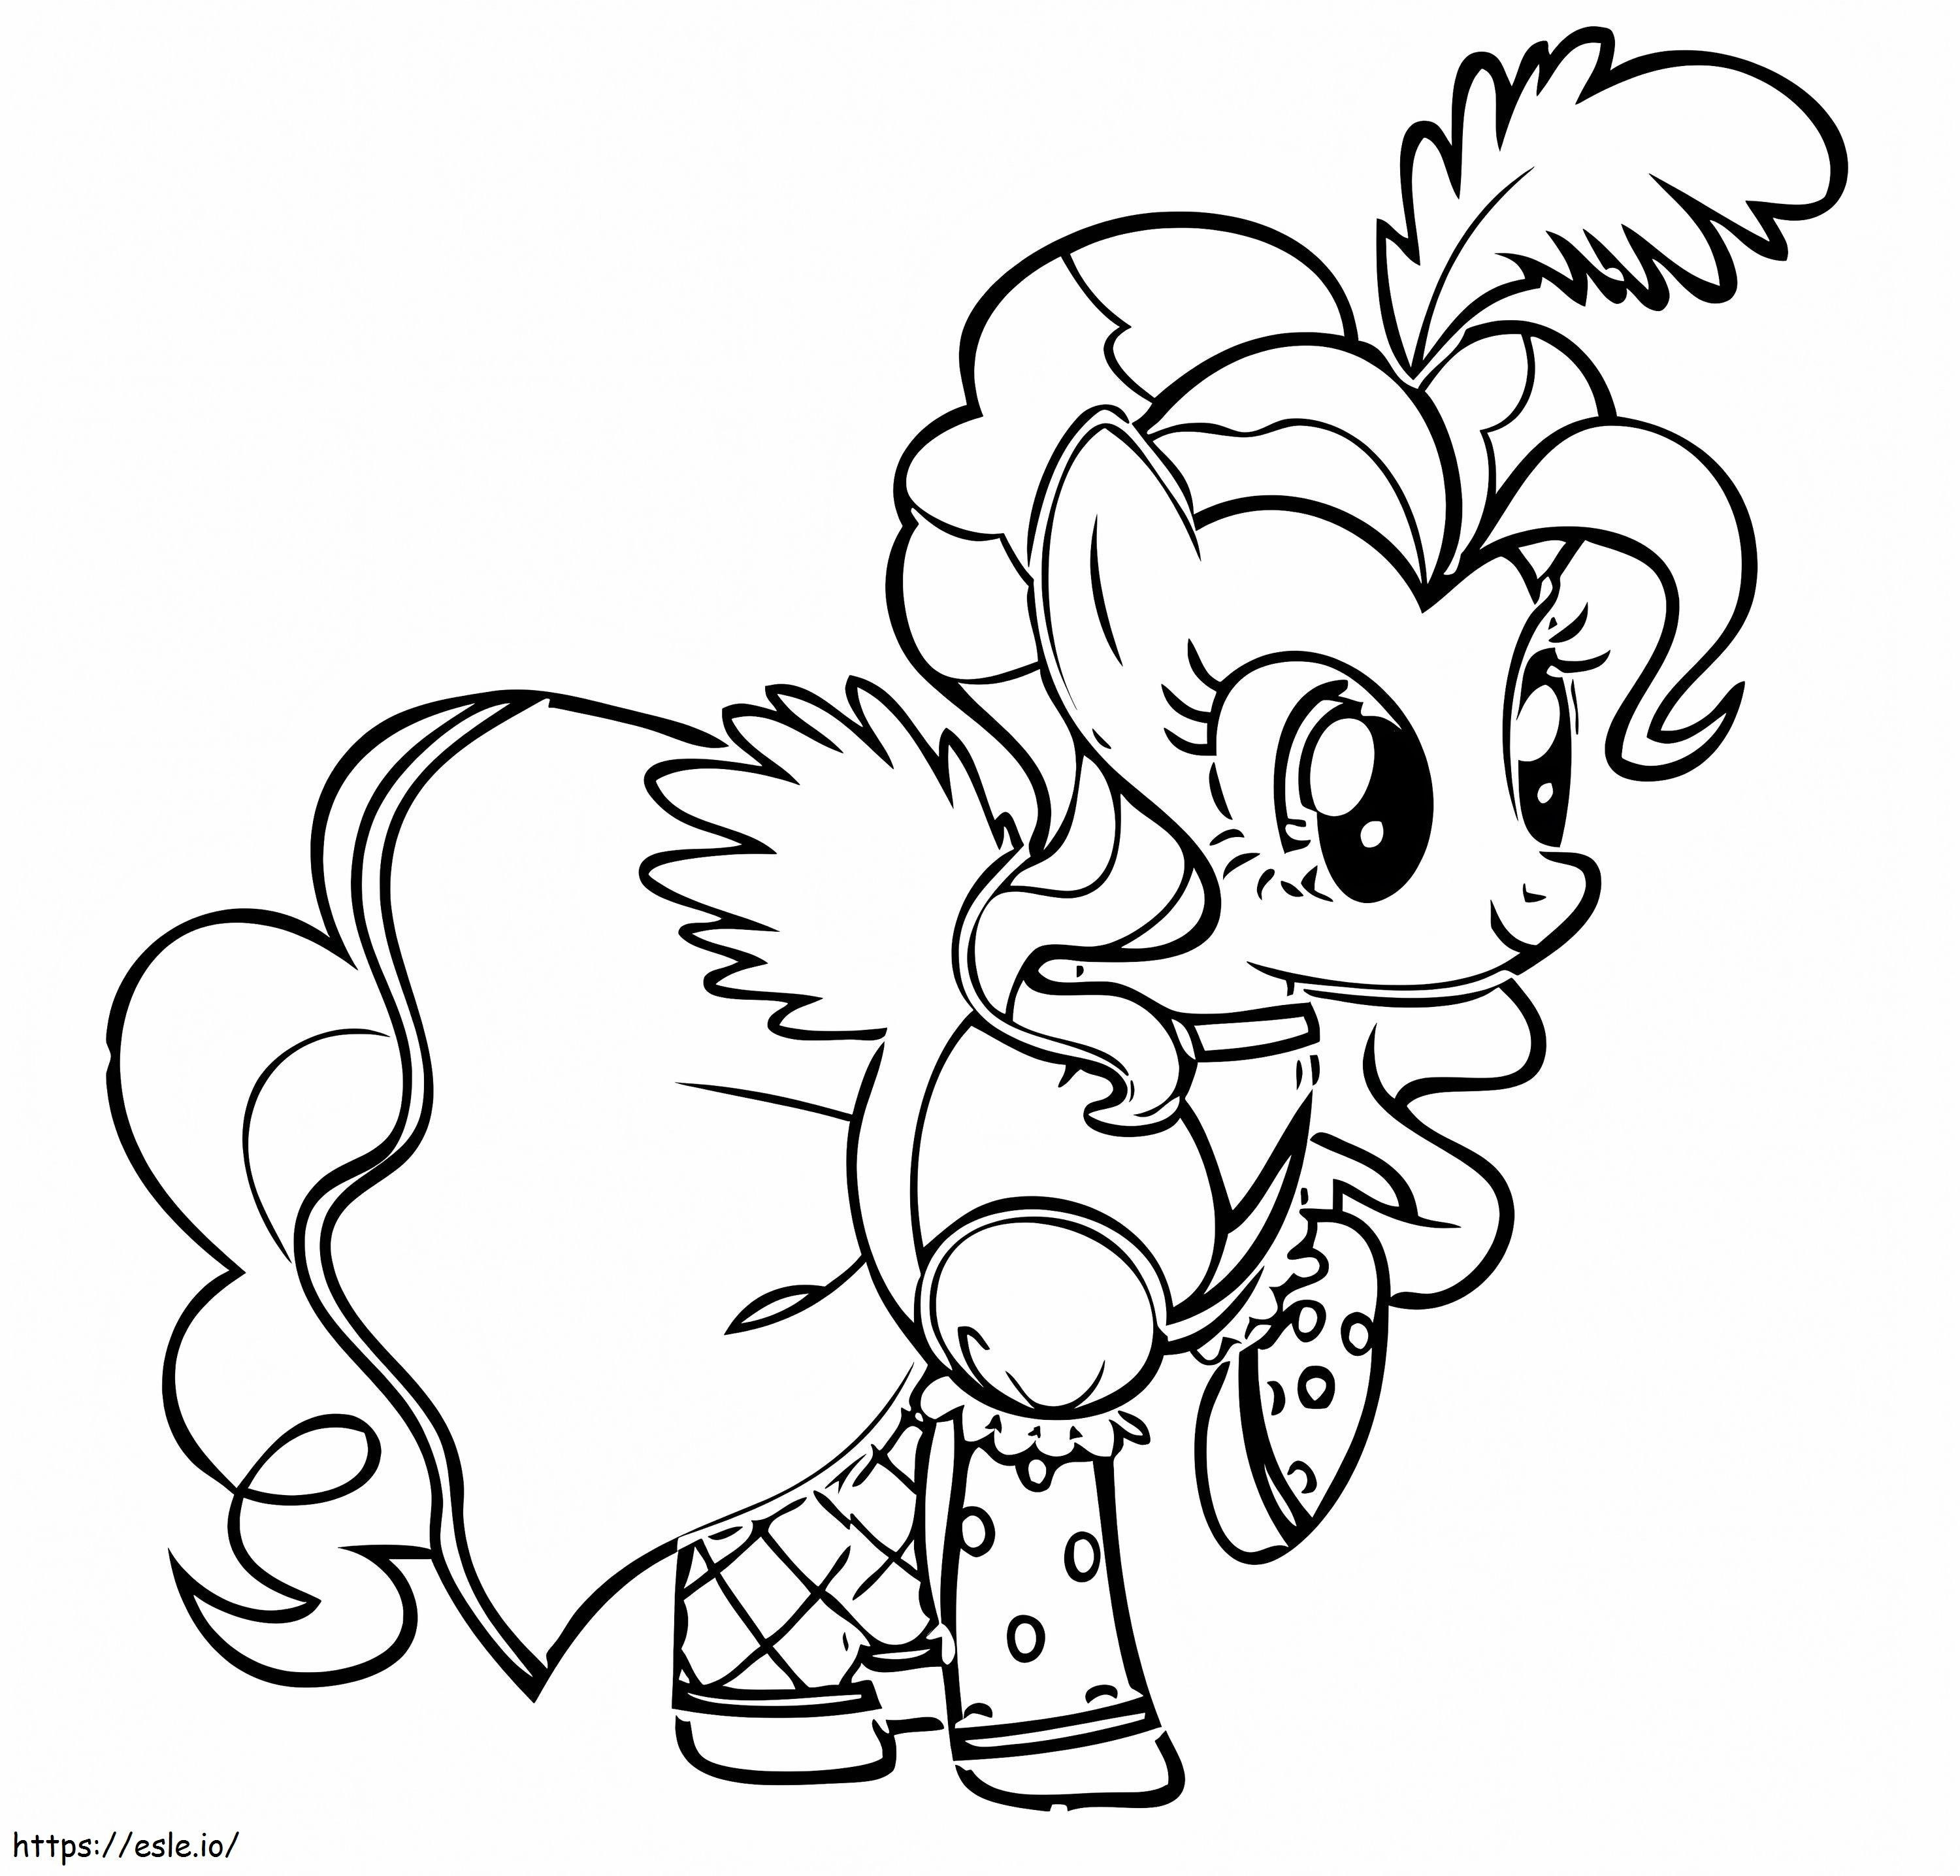 Awesome Pinkie Pie coloring page